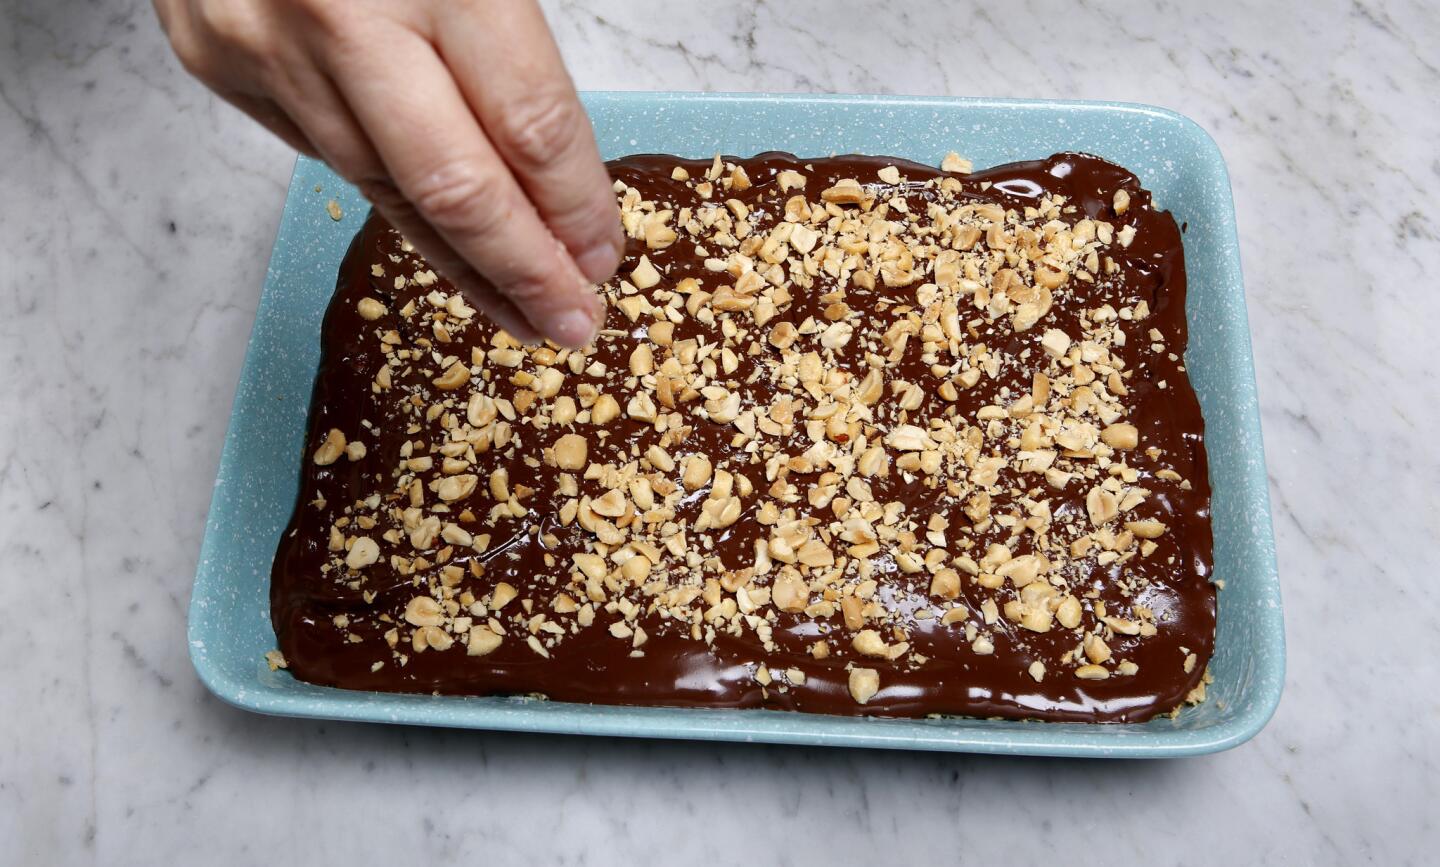 No-bake peanut butter bars step-by-step